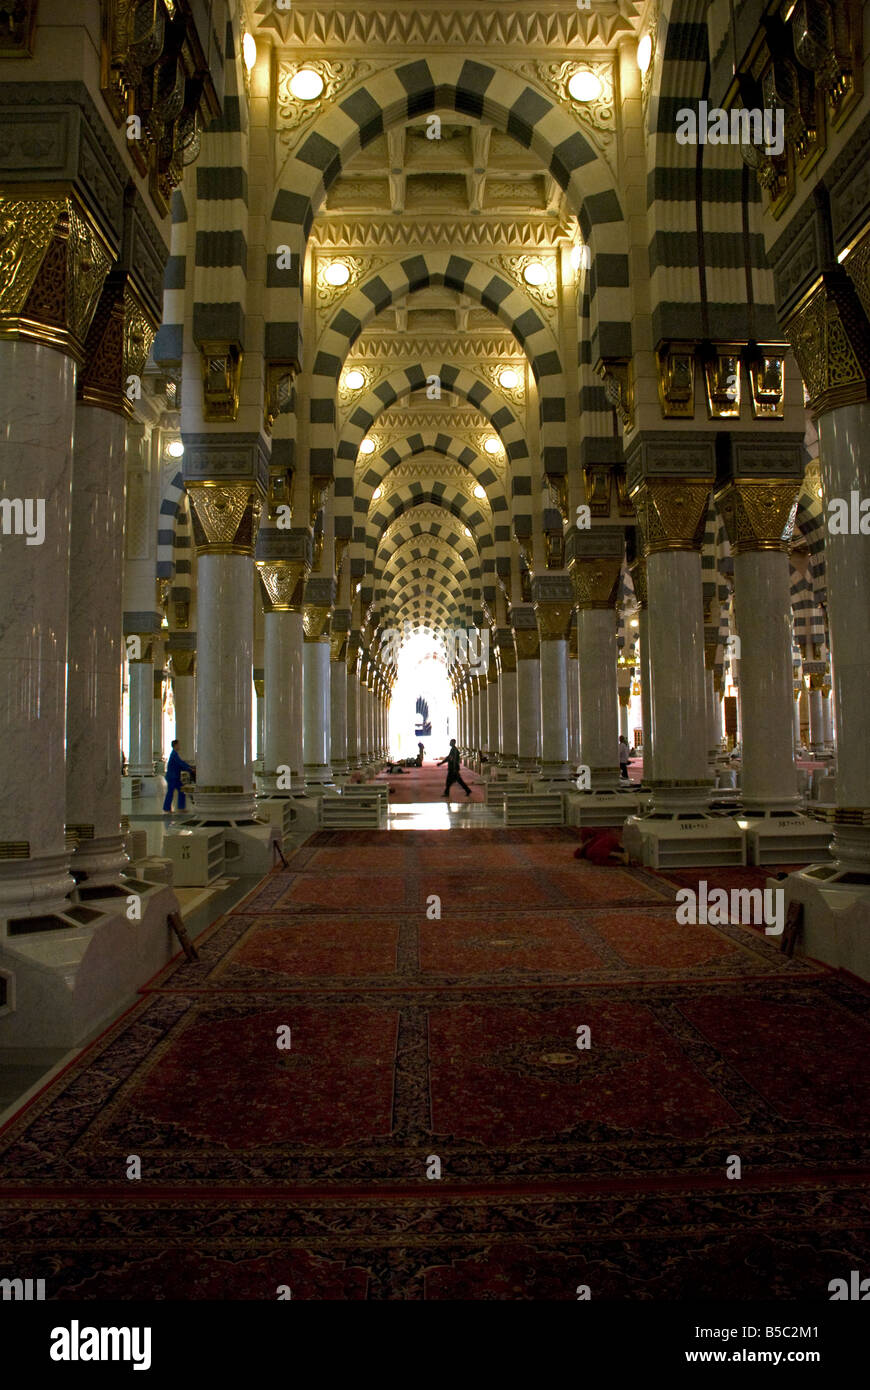 The Interior Of One Of The Extensions Of Masjid Al Nabawi In